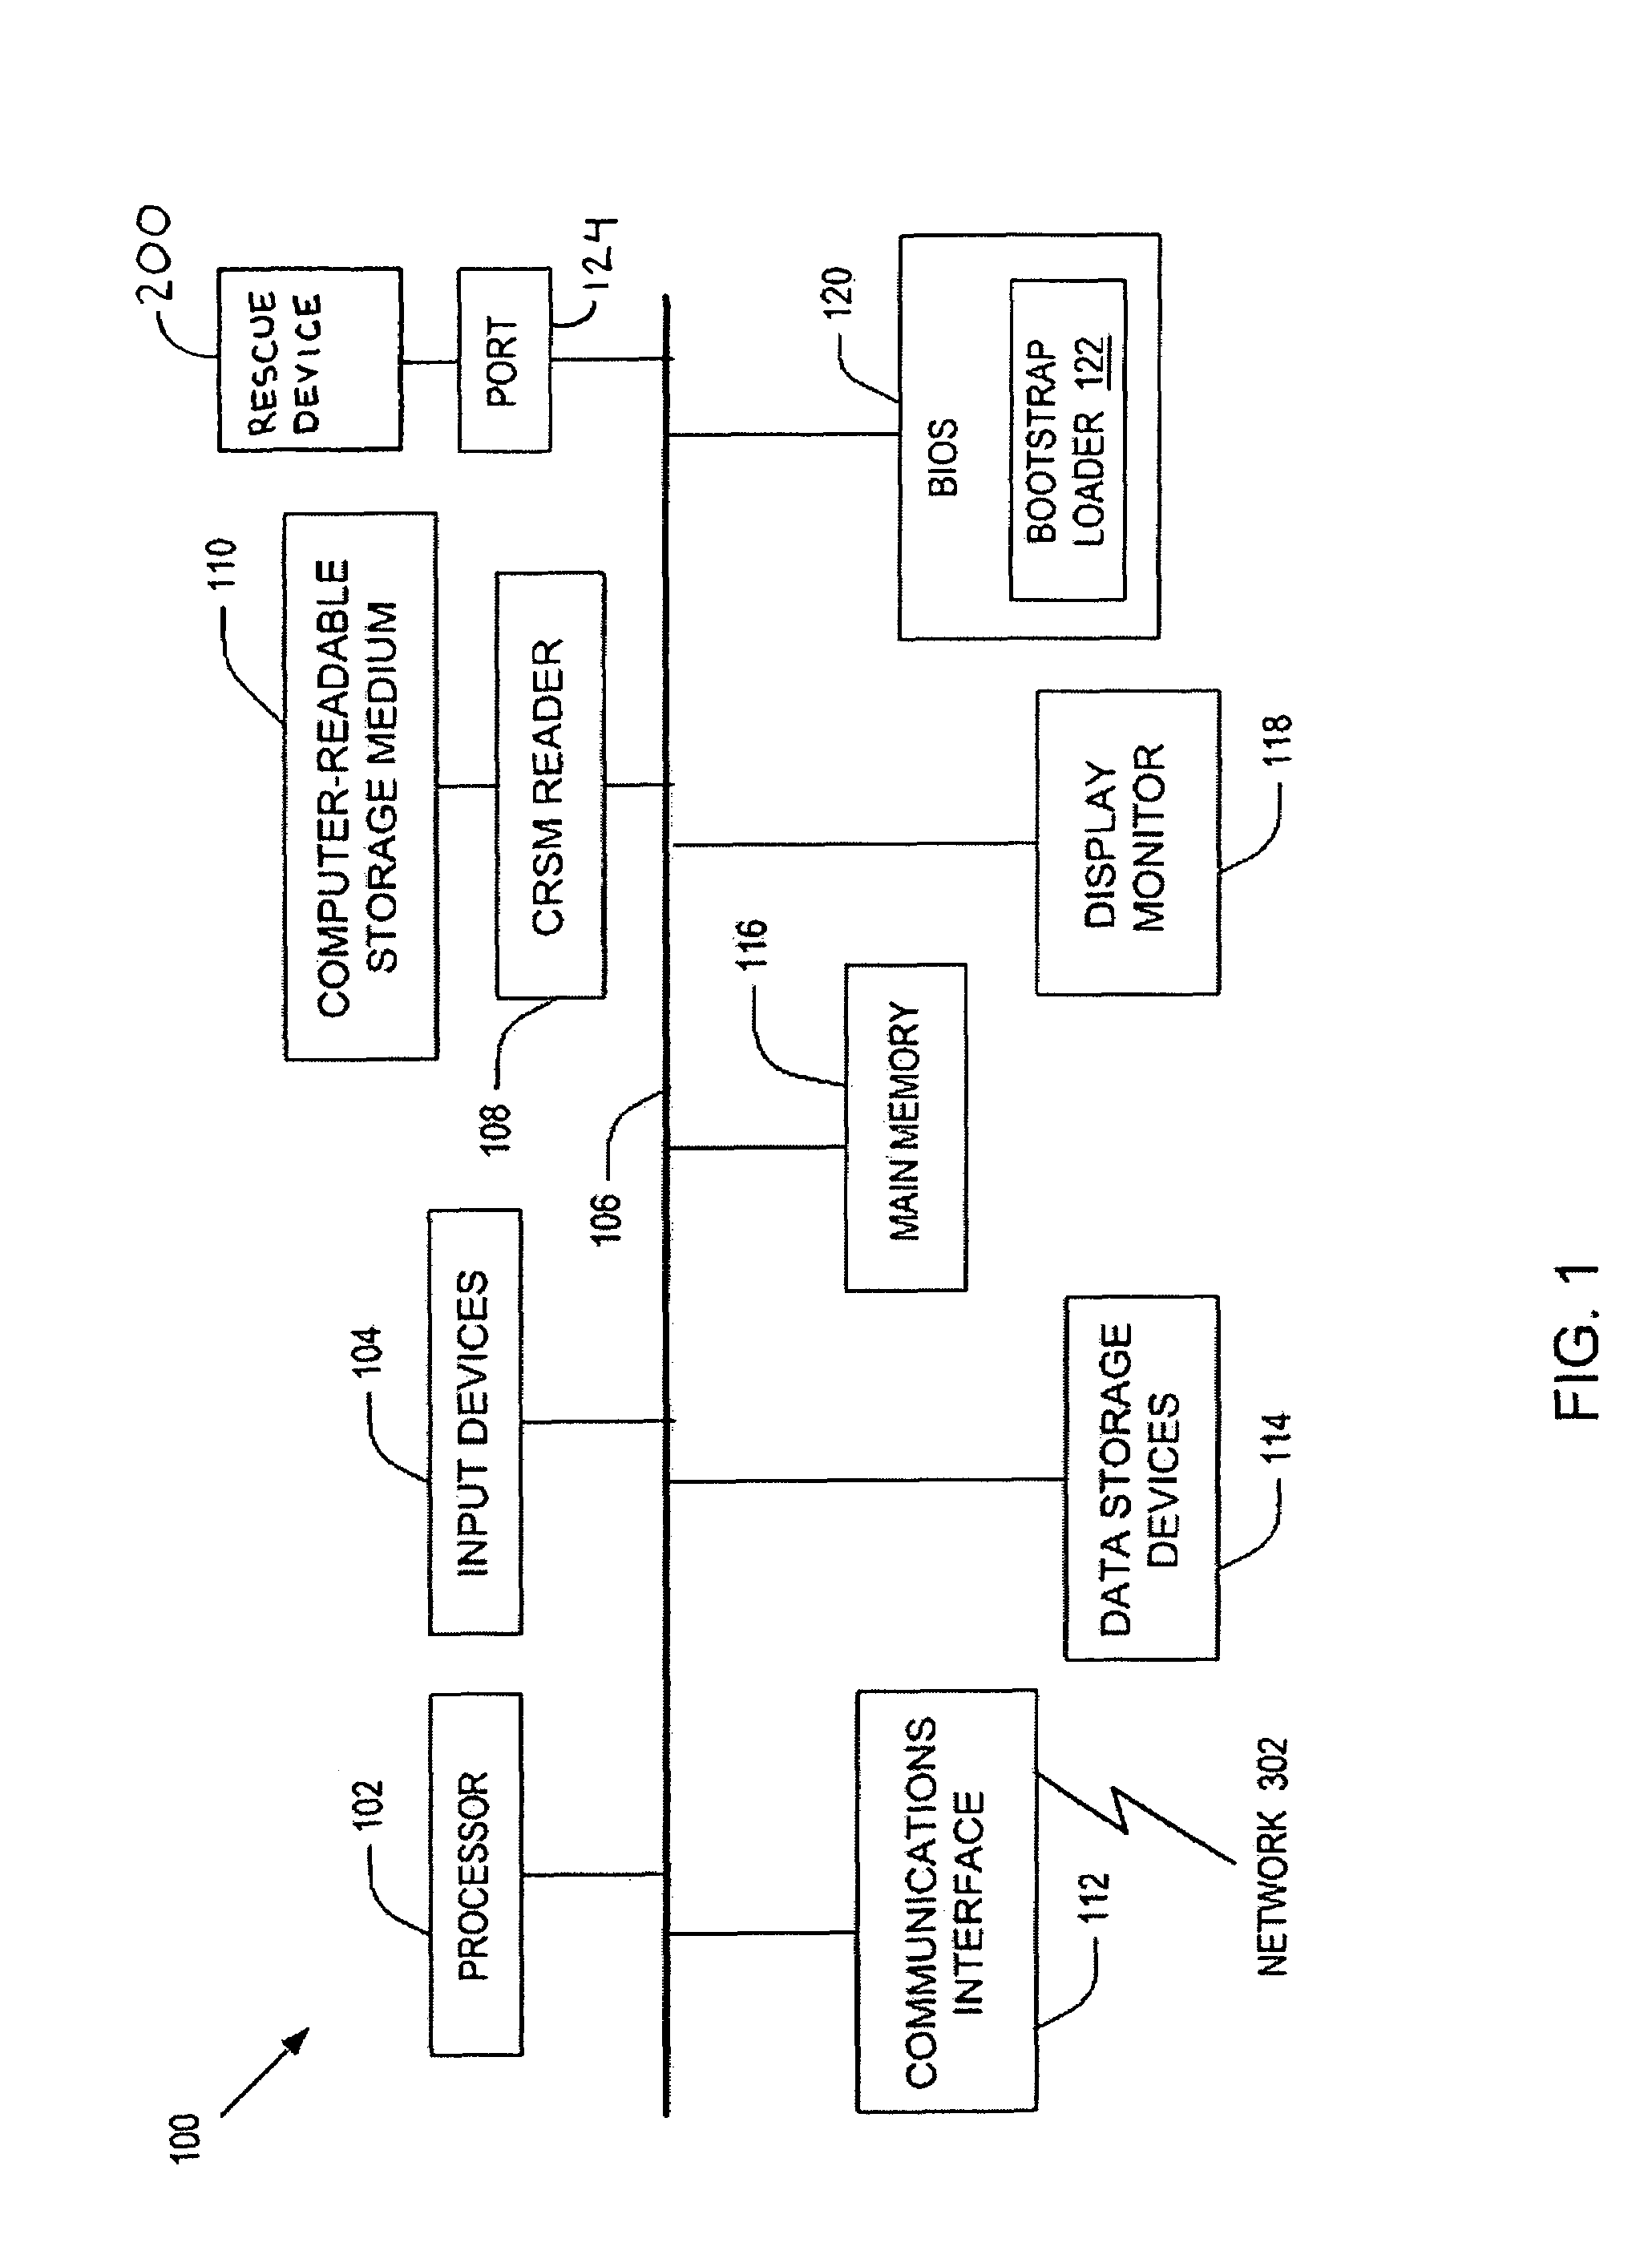 Portable antivirus device with solid state memory